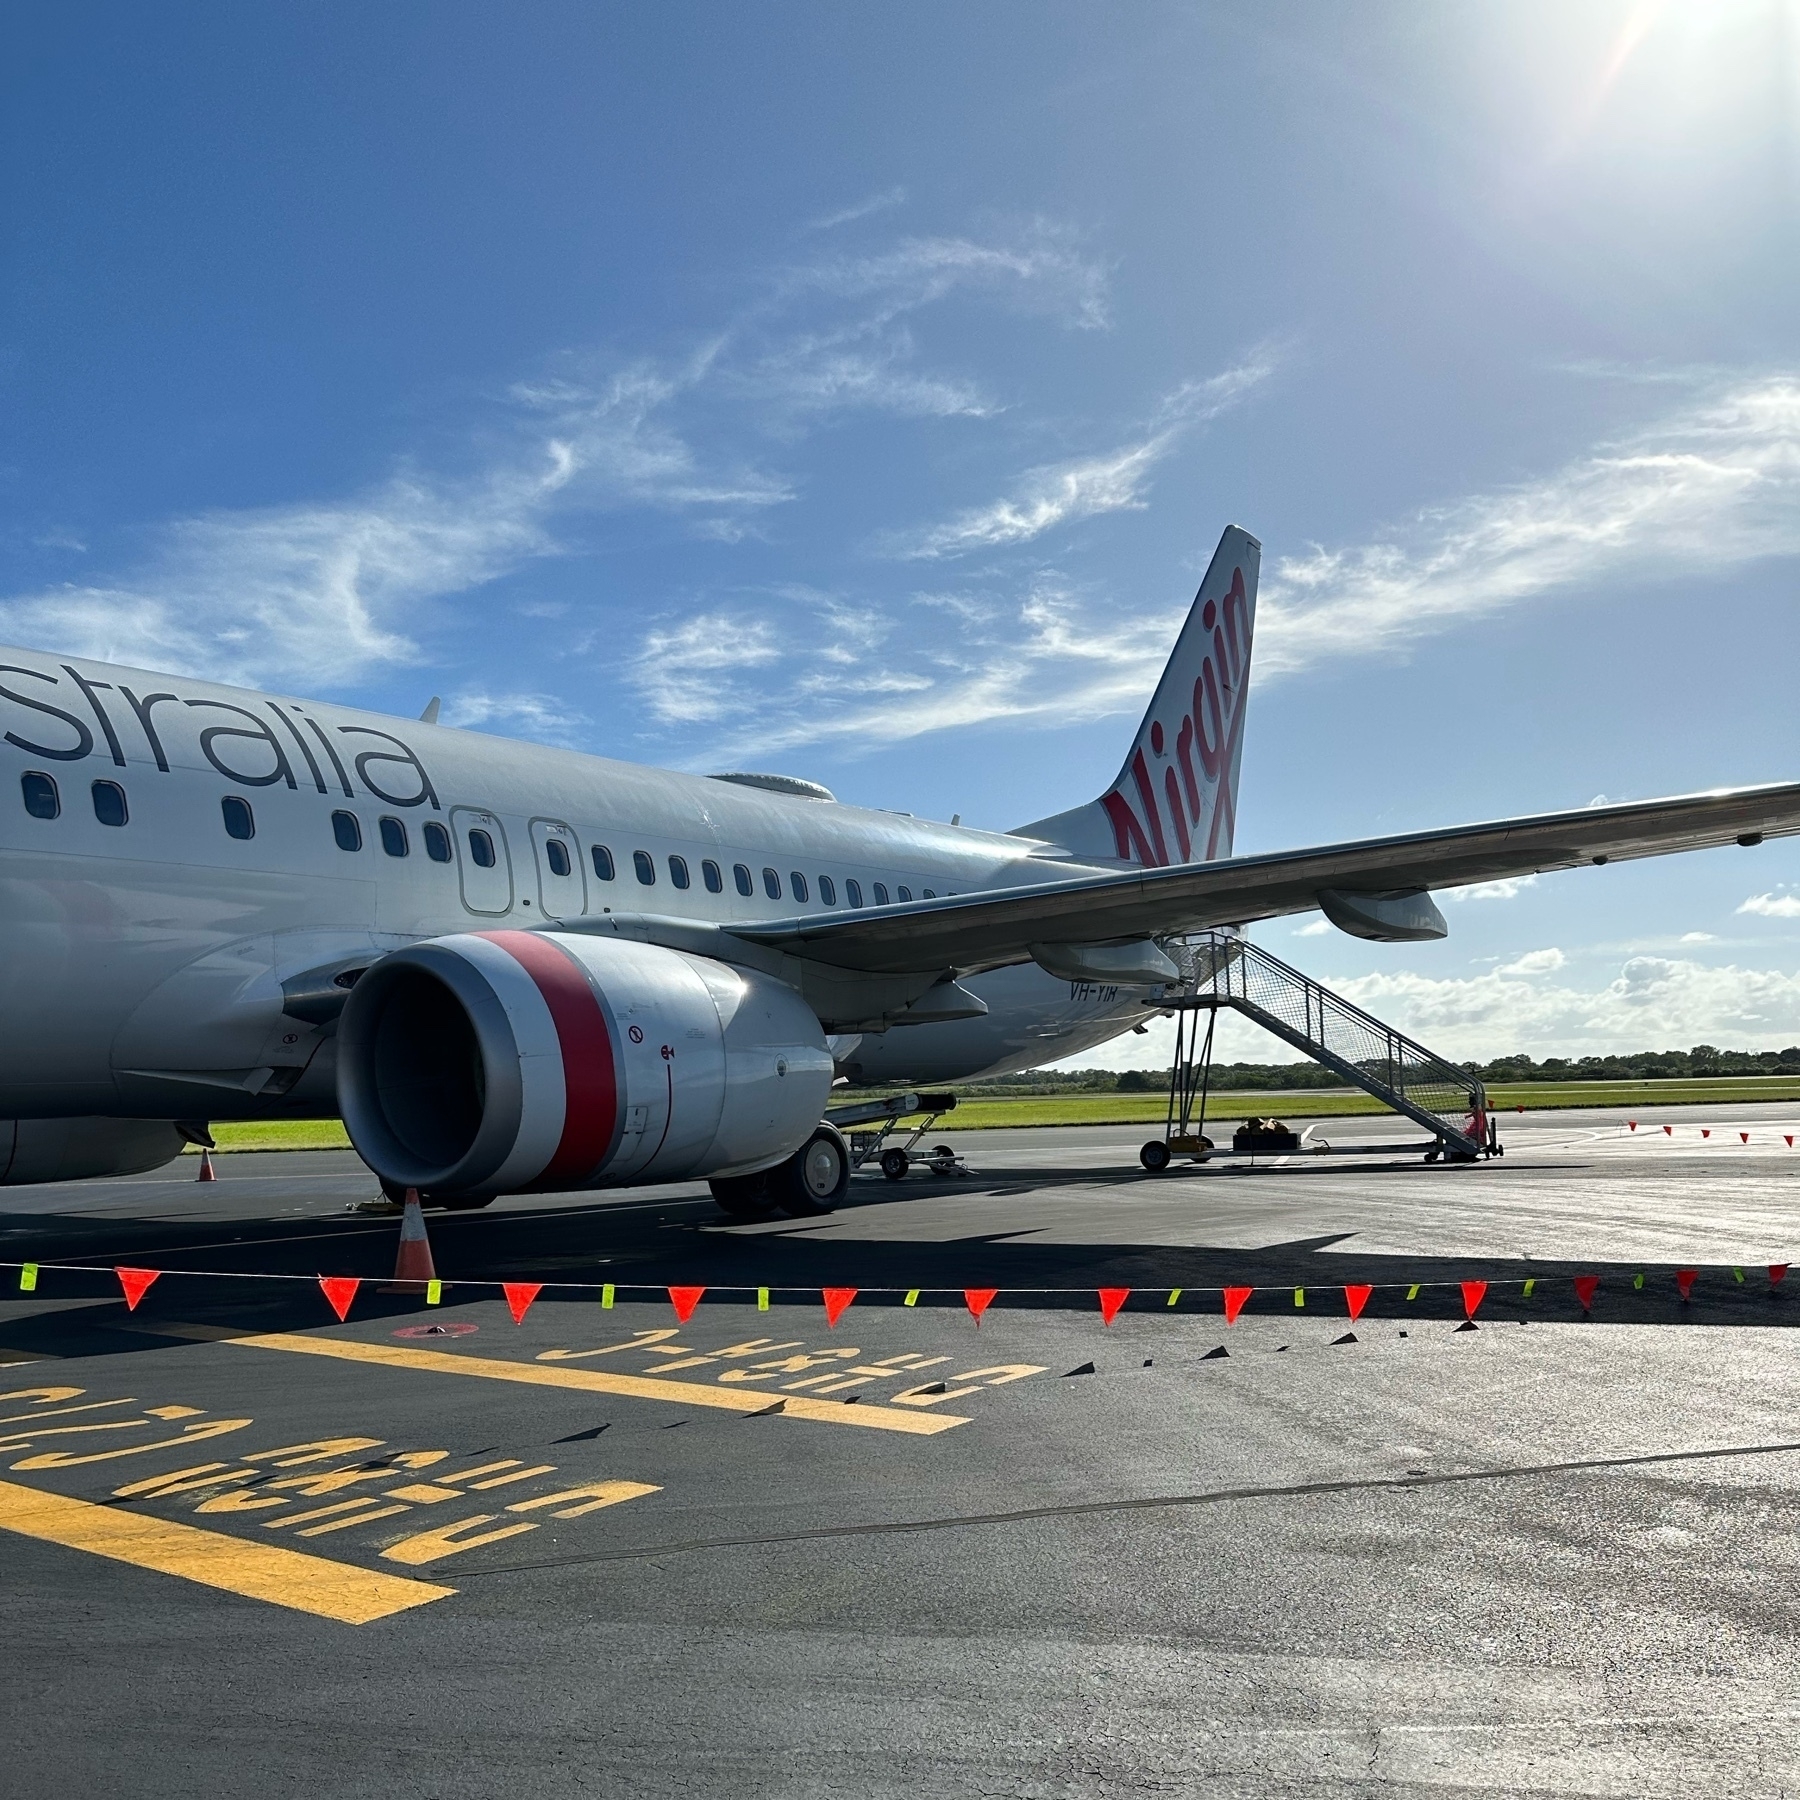 A Virgin Australia plane on the tarmac, one engine and wing along with the tail is visible. A boarding stairs are at the rear door. A bright blue sky in the background.